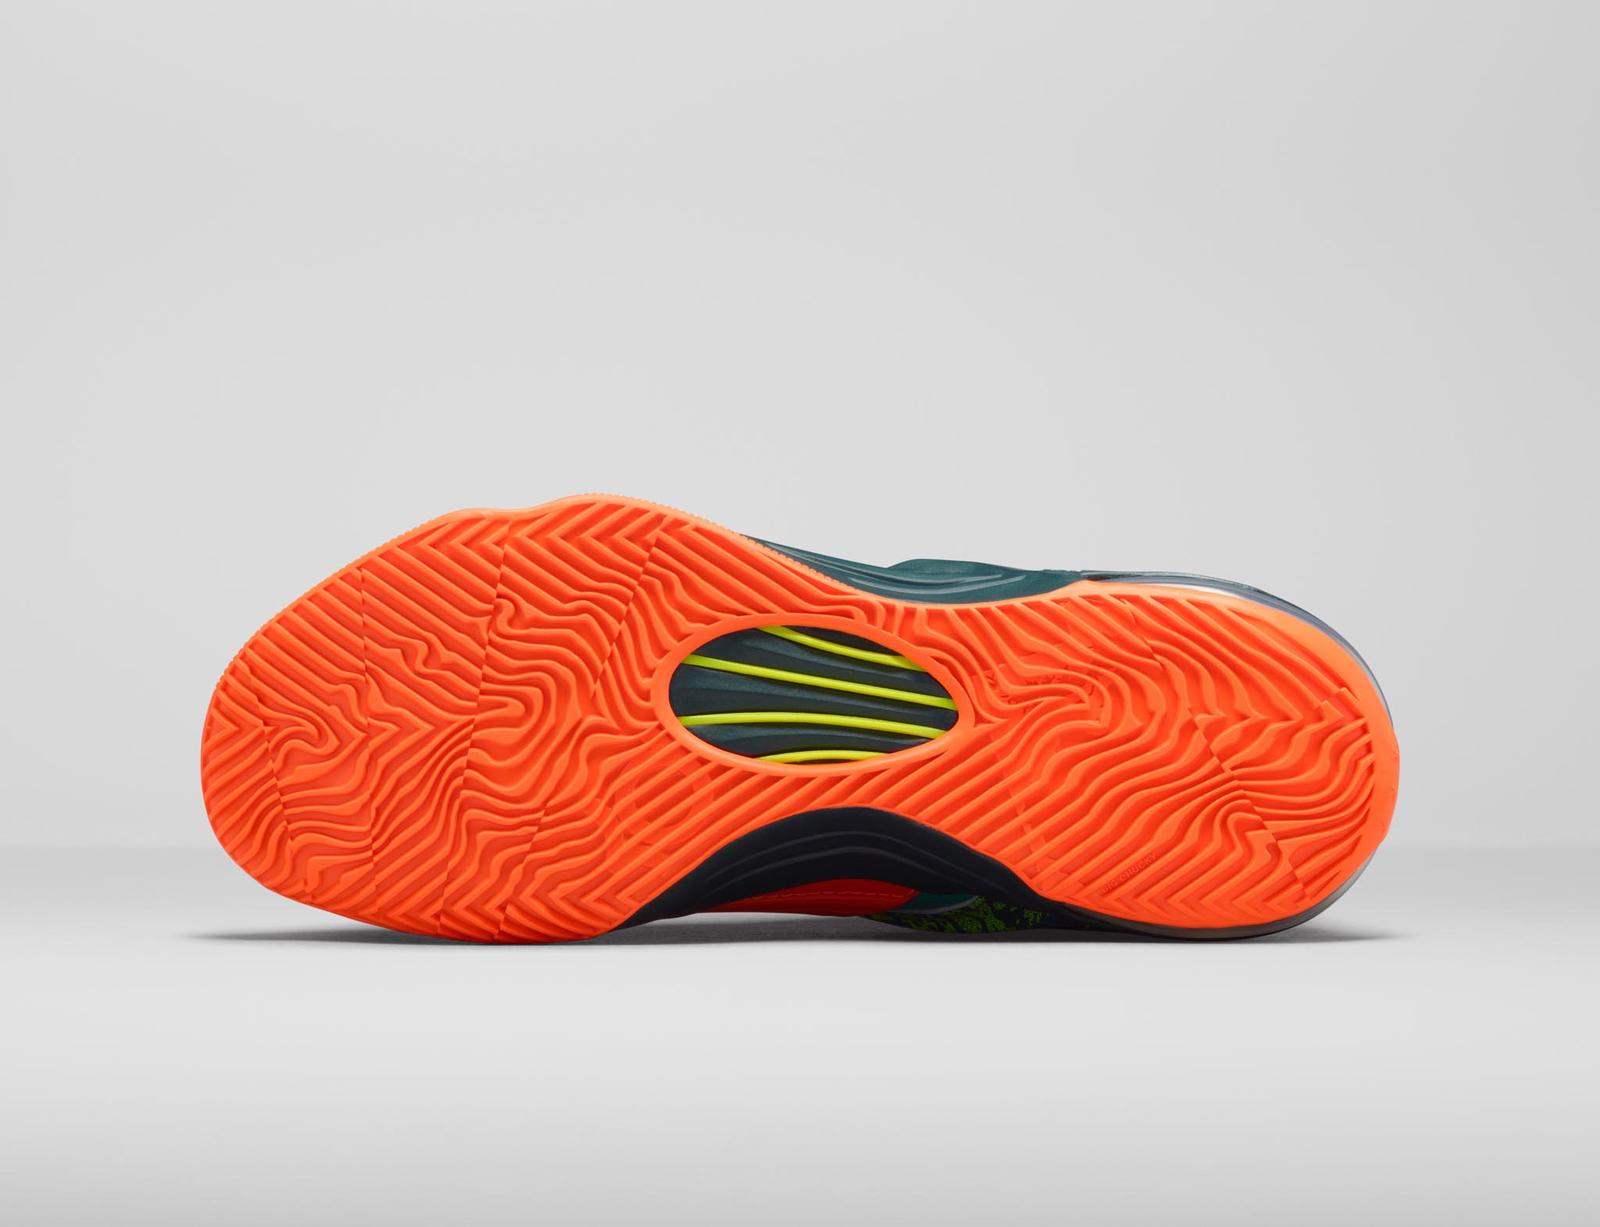 KD7 "Weatherman" Official Images